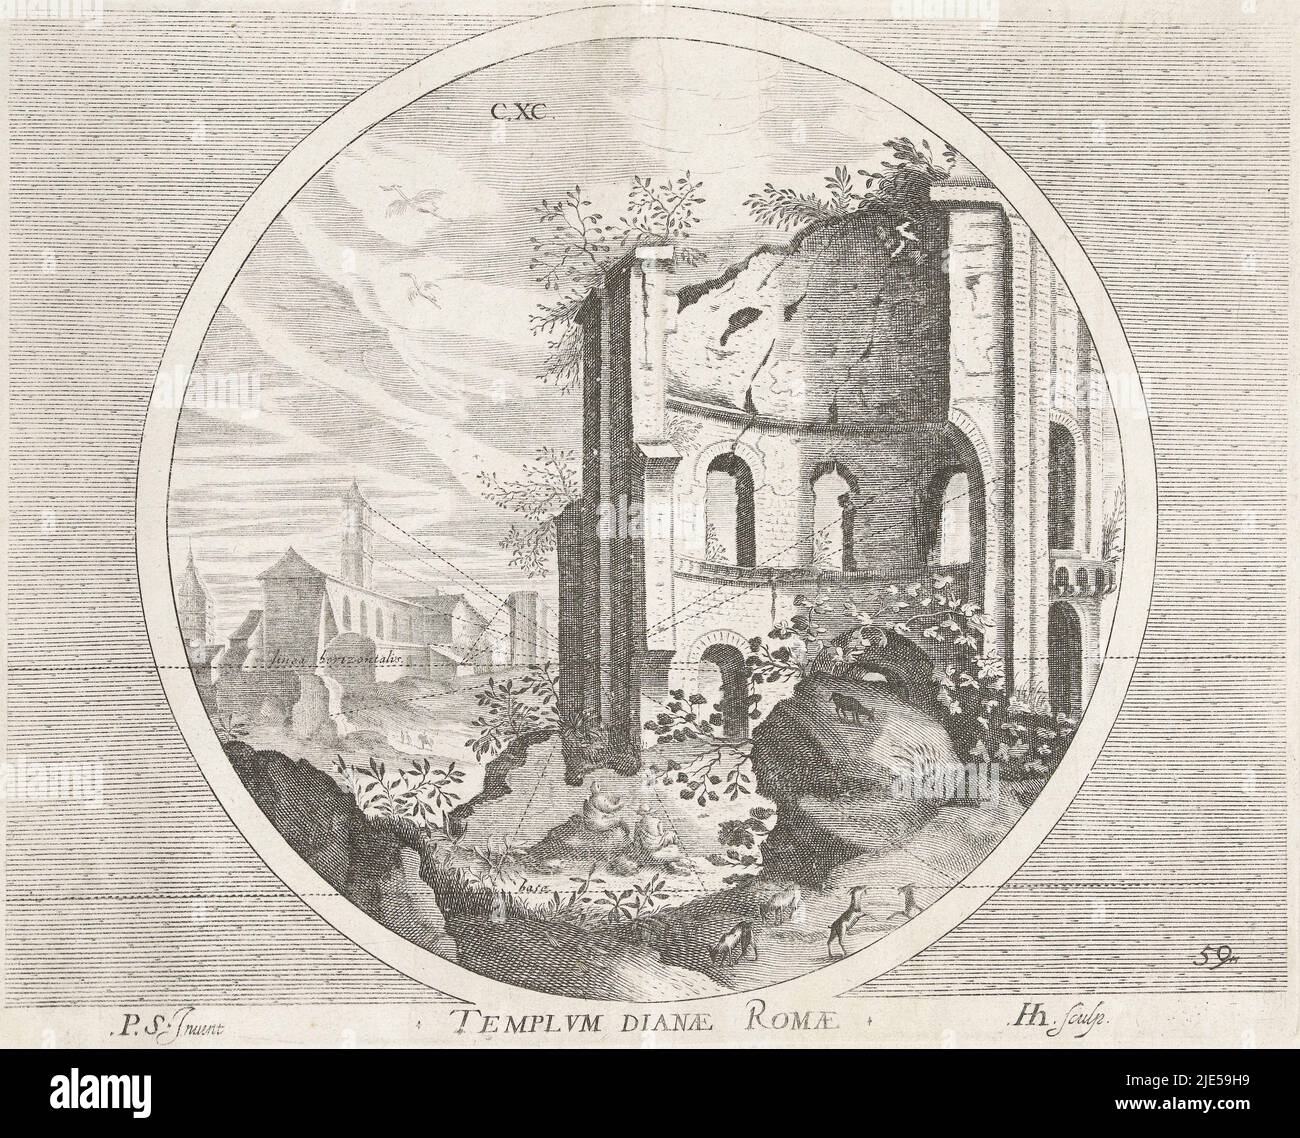 View of the ruins of the temple of Diana in Rome. With two seated figures in the foreground. Perspective dotted lines connect the buildings with the foreground and the horizon. To be read: linear horizontalis (left centre) and: base (bottom centre). In circle. At the top: C.XC. Print from a series of six depicting Roman ruins, Temple of Diana Templum Dianae Romae, Roman ruins (series title)., print maker: Hendrick Hondius (I), (mentioned on object), Petrus Stephanus, (mentioned on object), publisher: Hendrick Hondius (I), The Hague, 1600, paper, engraving, h 211 mm × w 264 mm Stock Photo